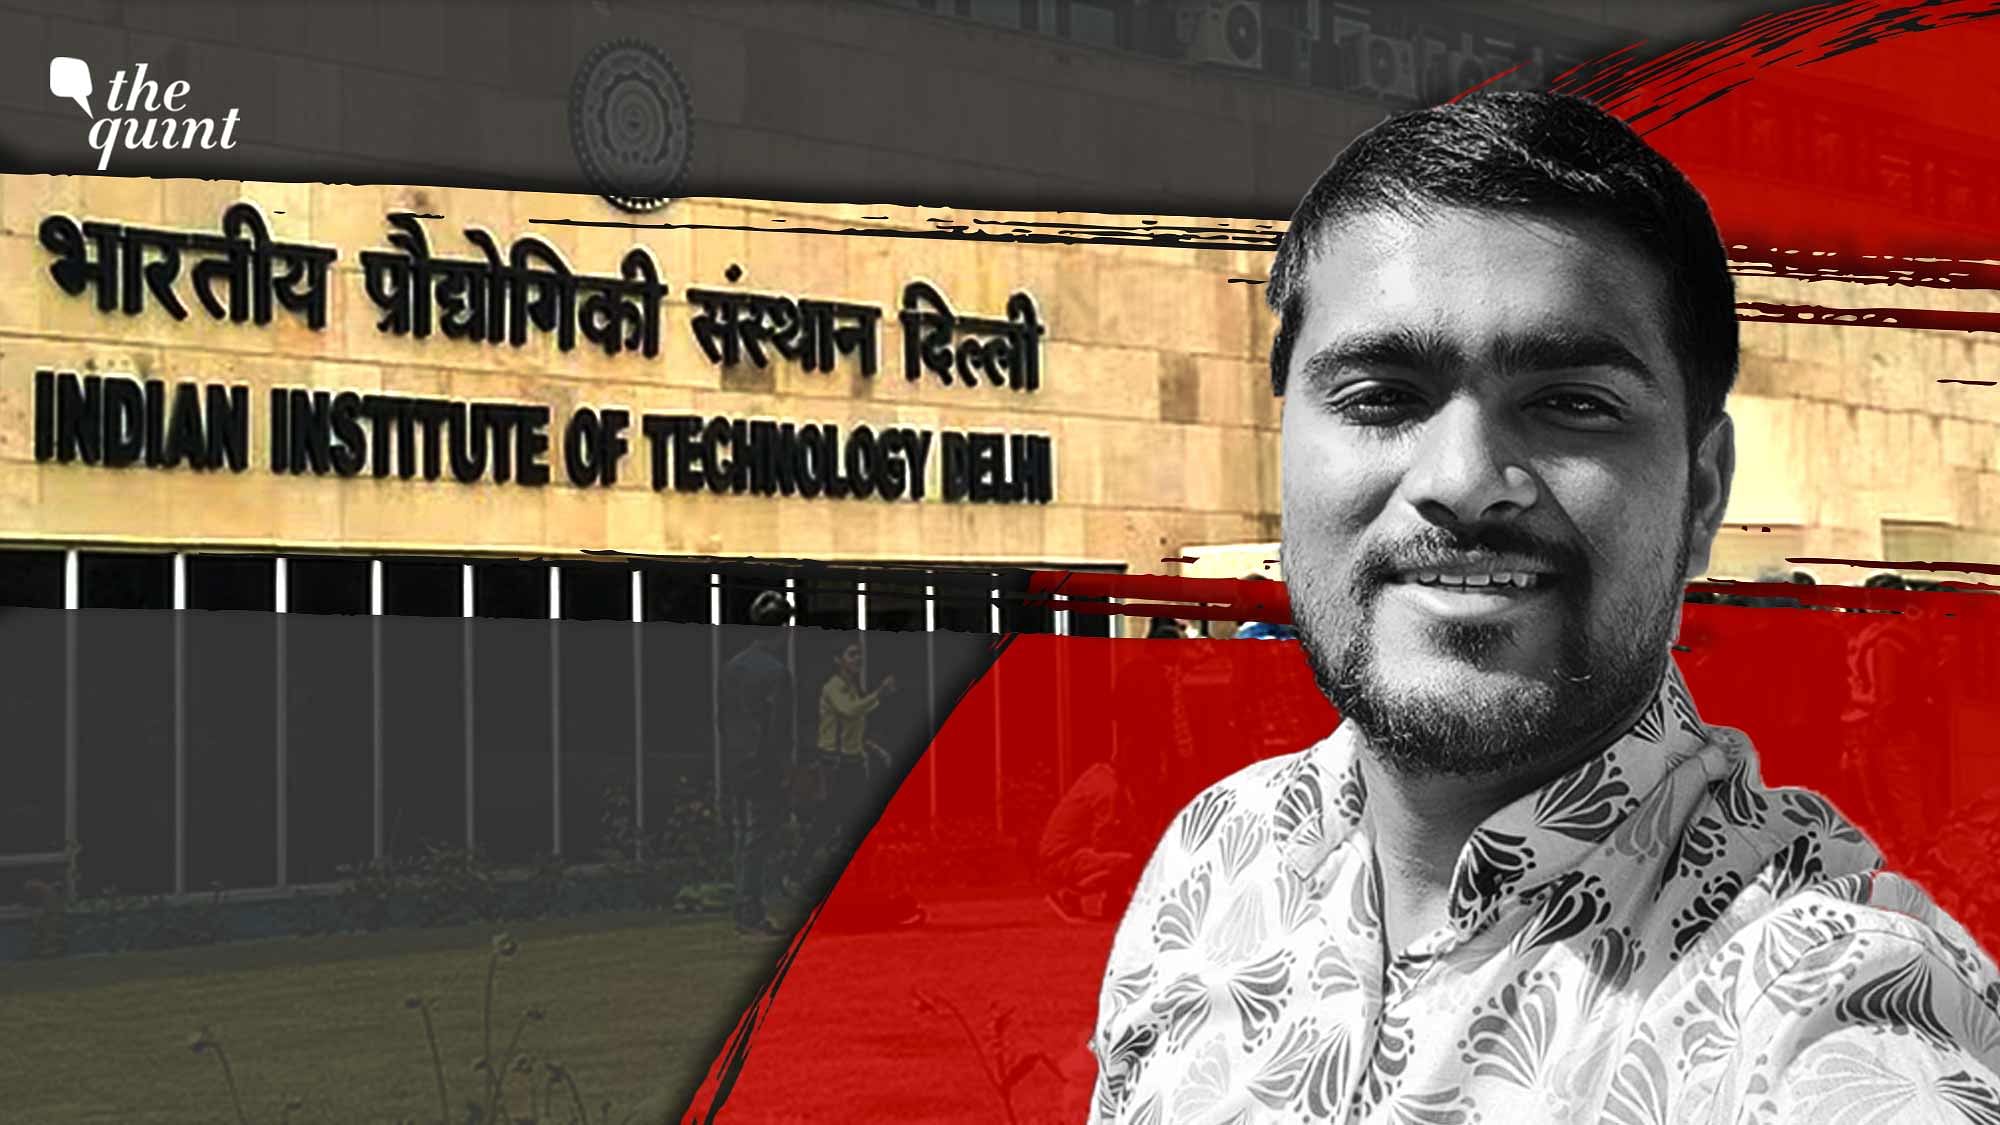 <div class="paragraphs"><p>24-year-old Varad Sanjay Nerkar, a final-year MTech student, allegedly died by suicide at the IIT-Delhi campus on 15 February.&nbsp;</p></div>